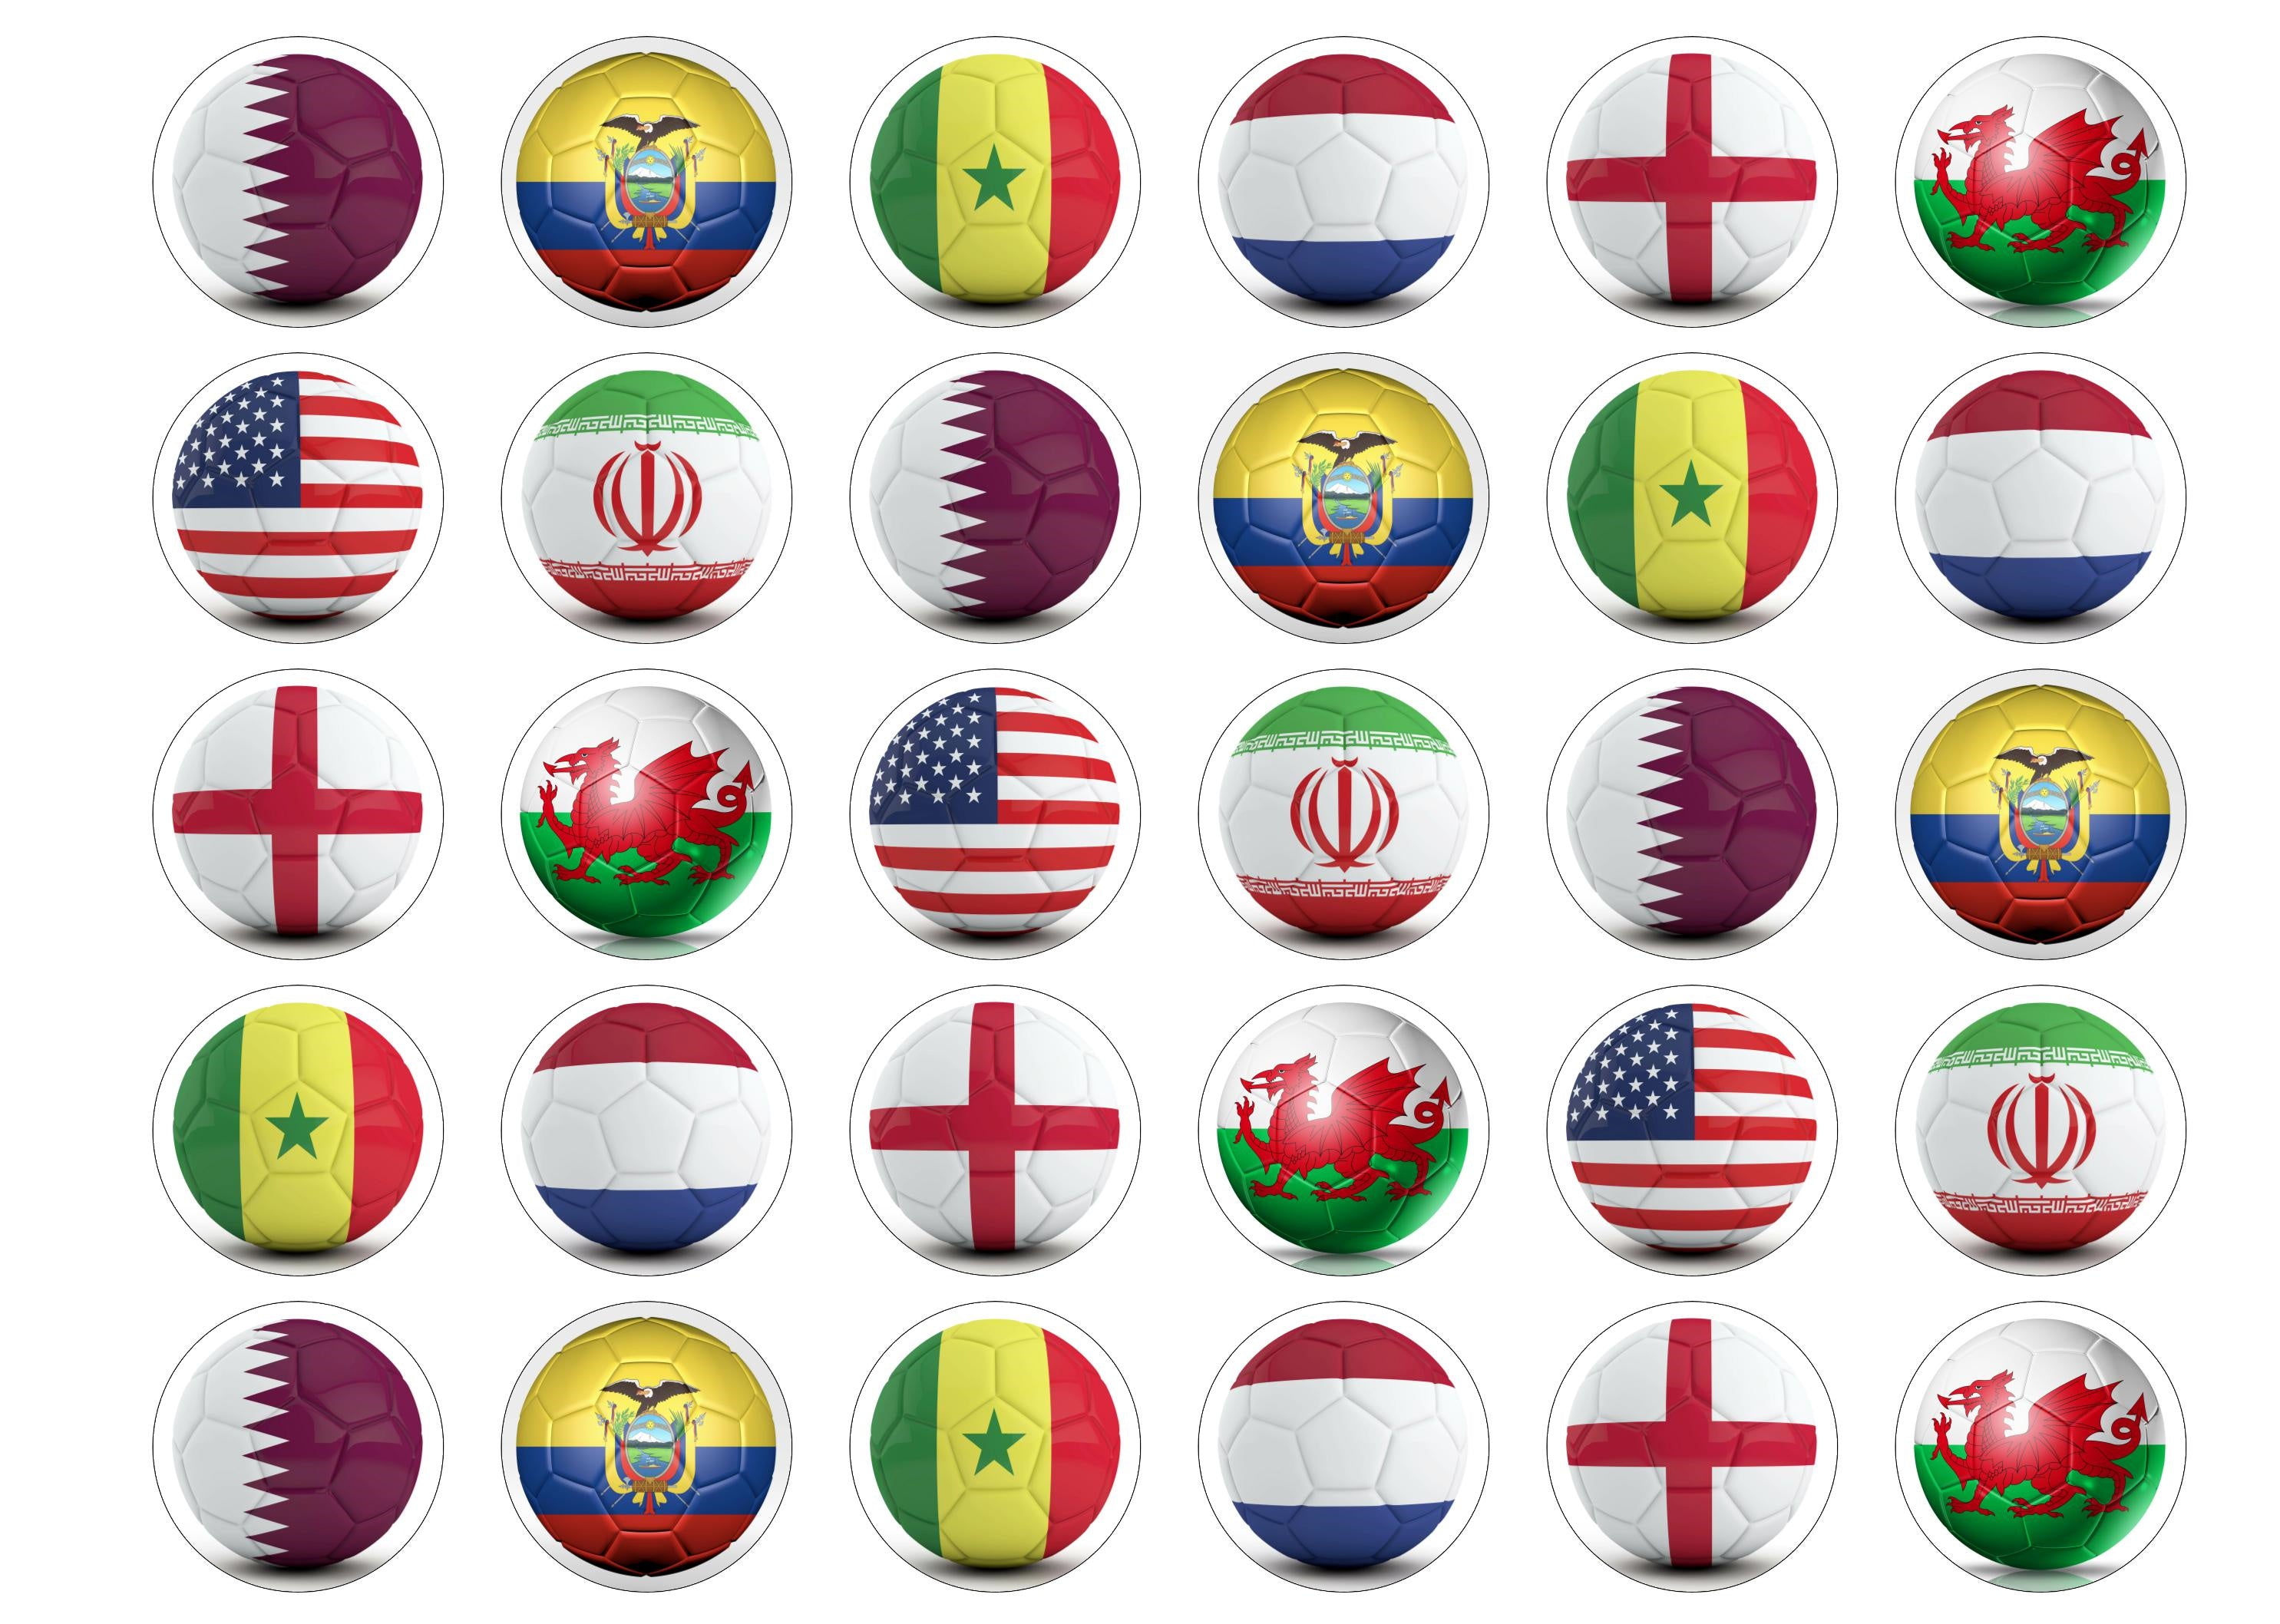 30 edible toppers with flags of the countries in Group a and Group b in the World Cup 2022